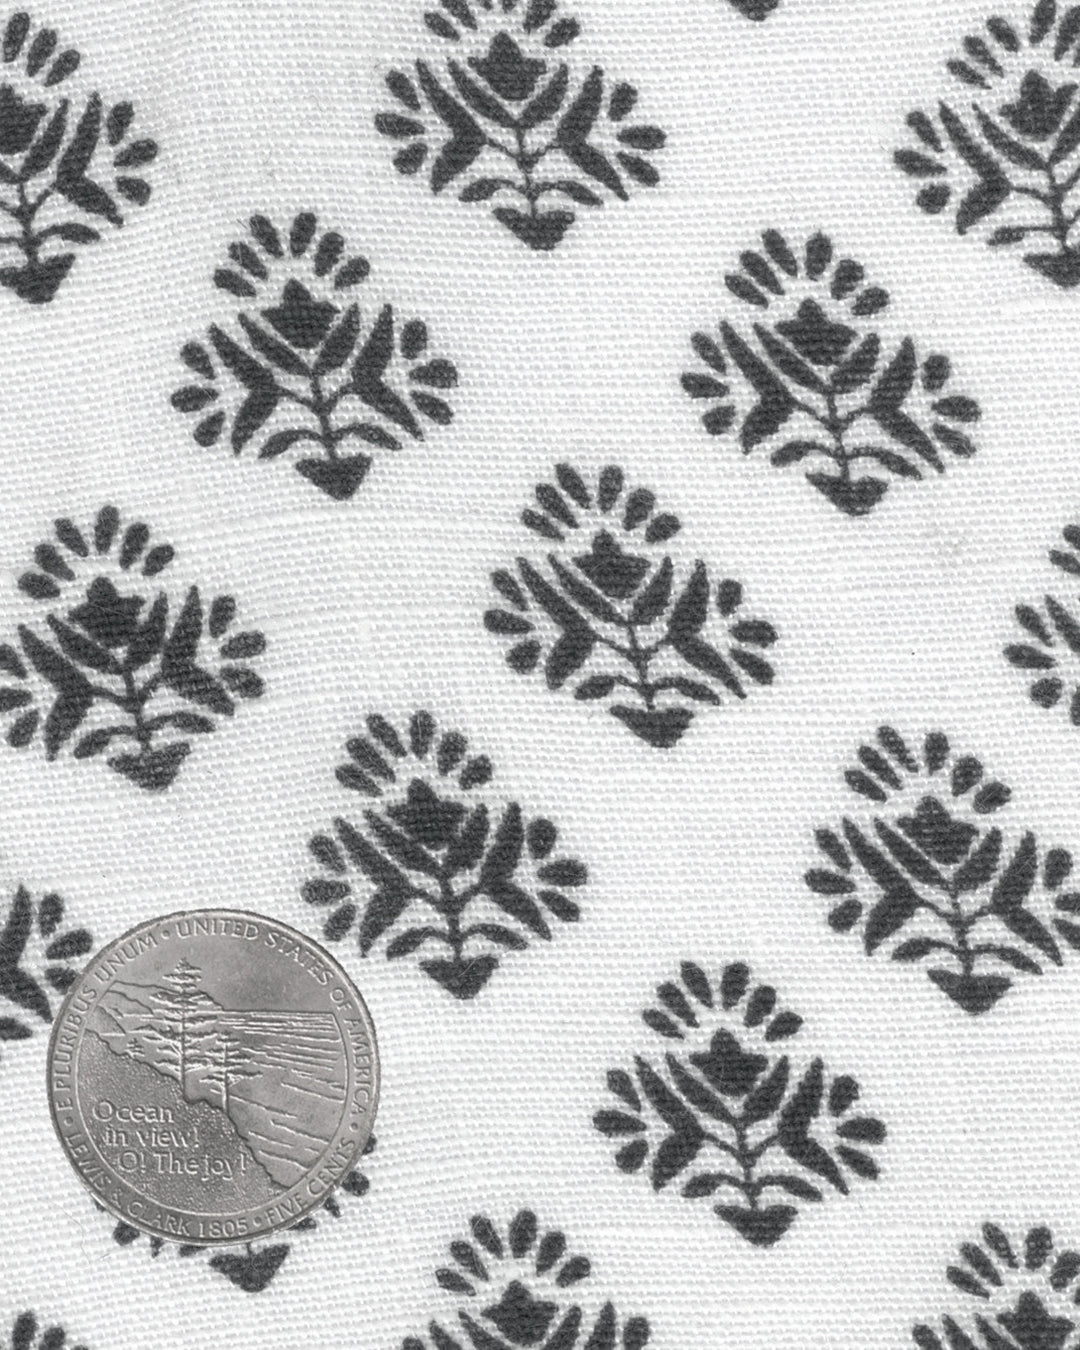 Camp collar PRESET STYLE in Linen:Black Flowers Printed on White Linen